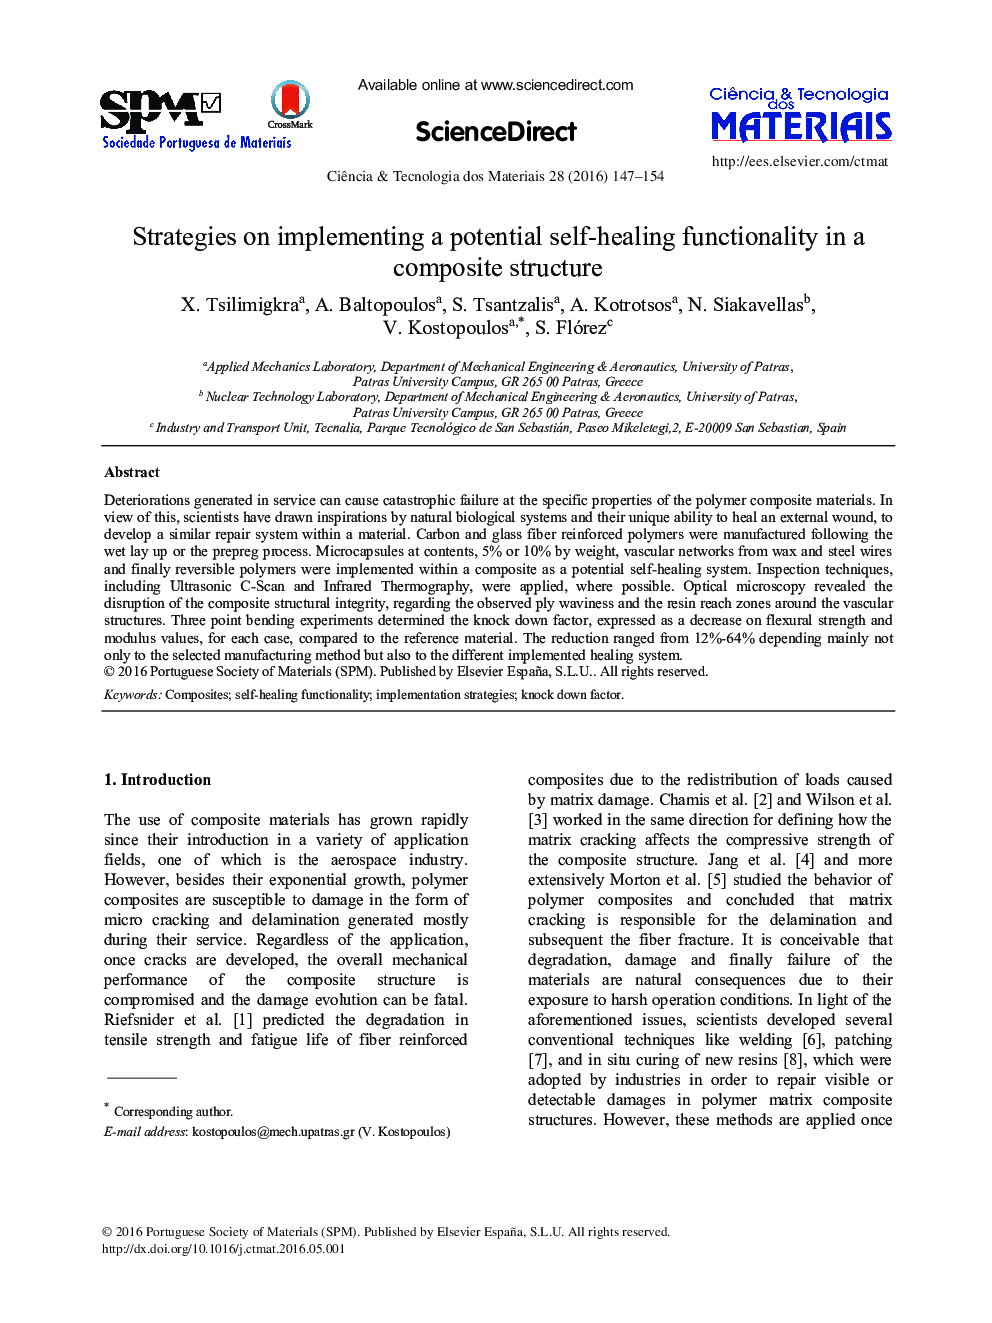 Strategies on implementing a potential self-healing functionality in a composite structure